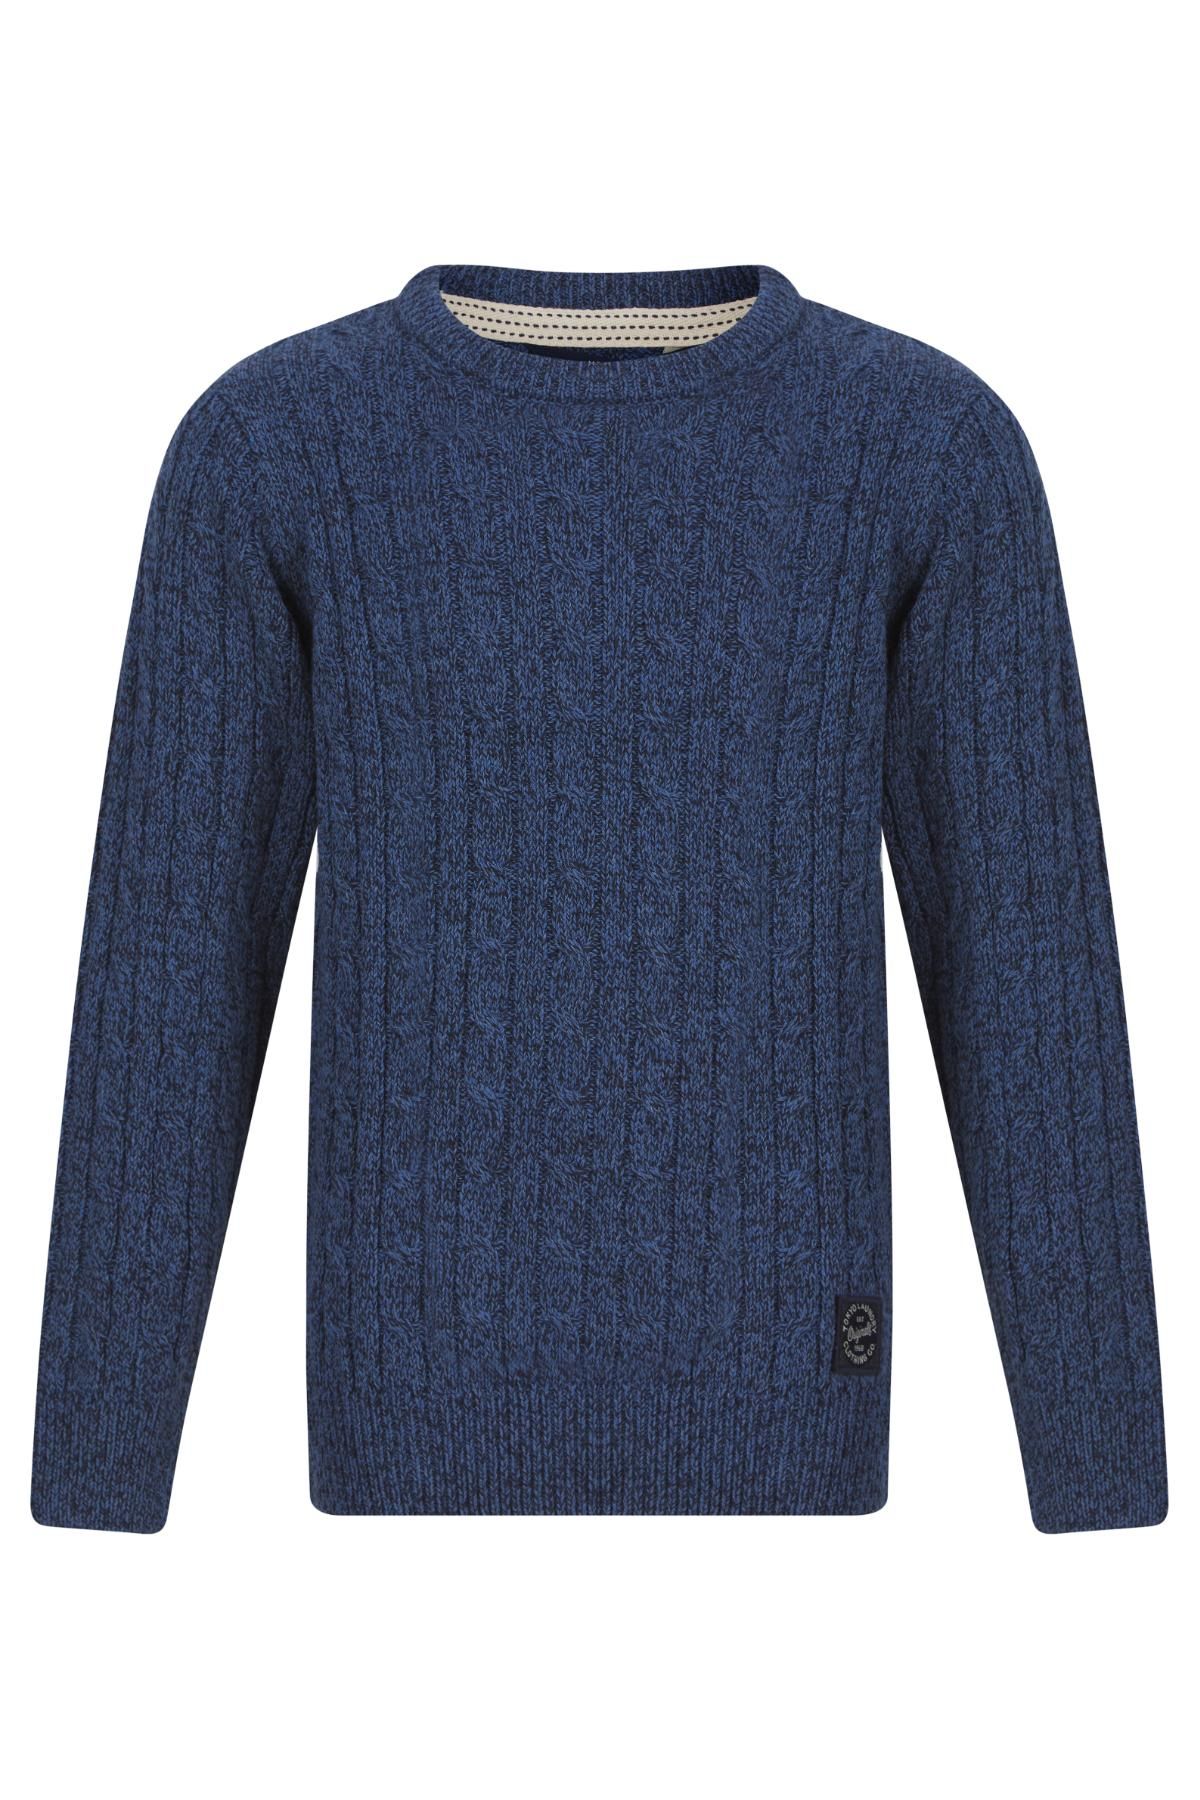 Tokyo Laundry Boys Knitted Jumper Blue